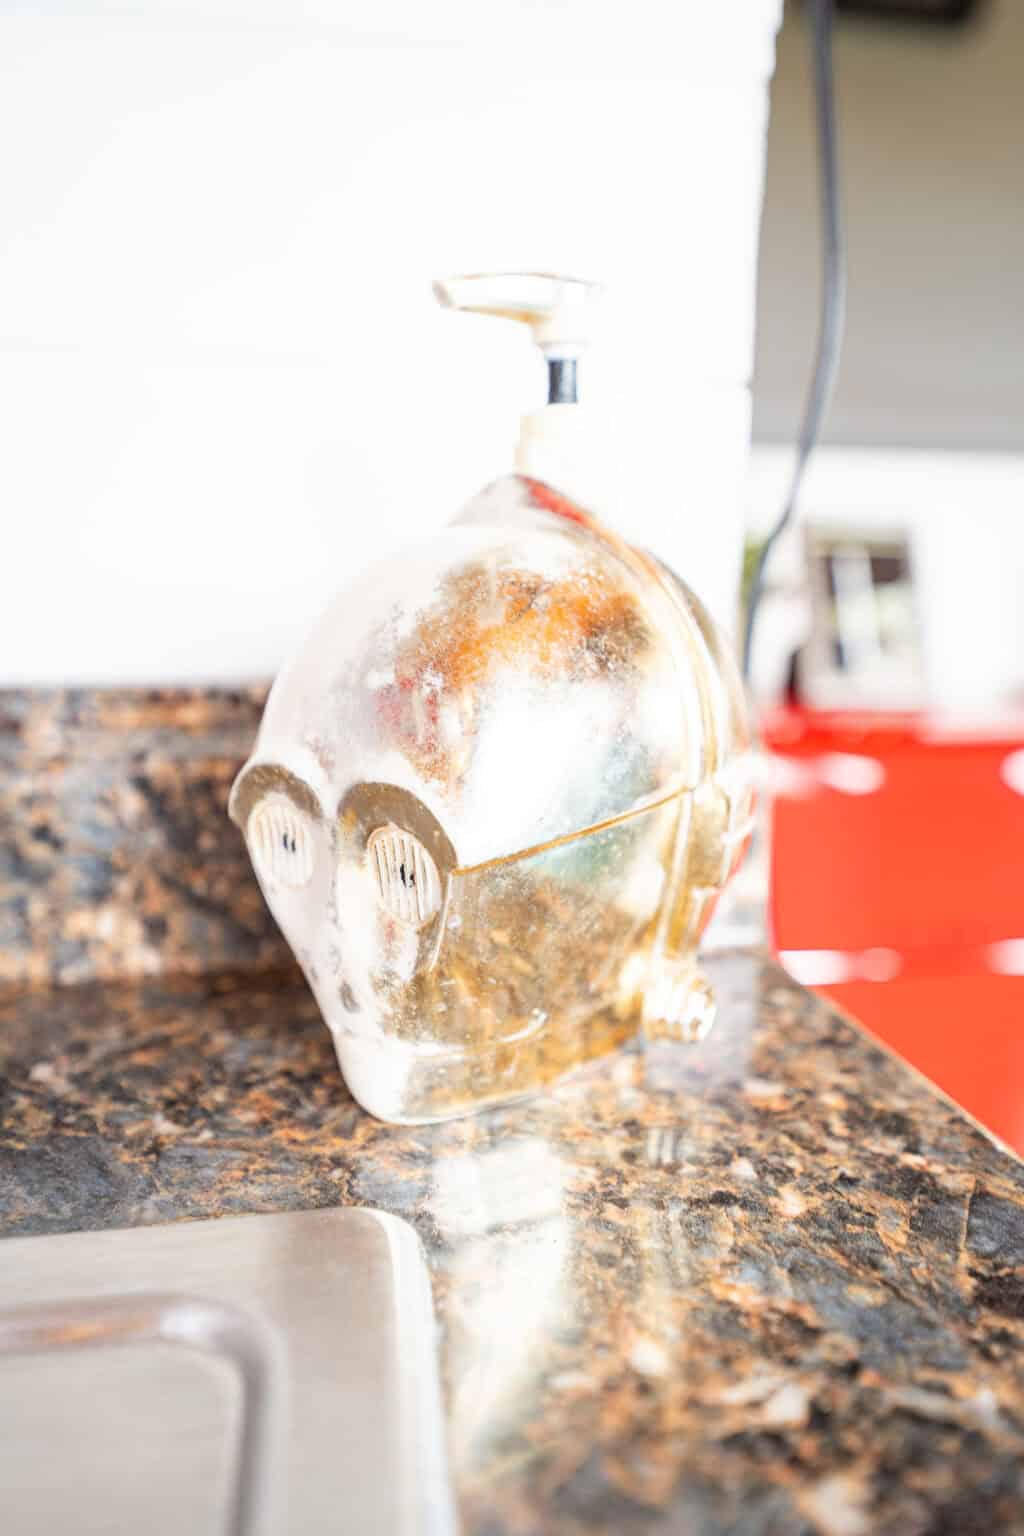 a plastic robot head on a counter